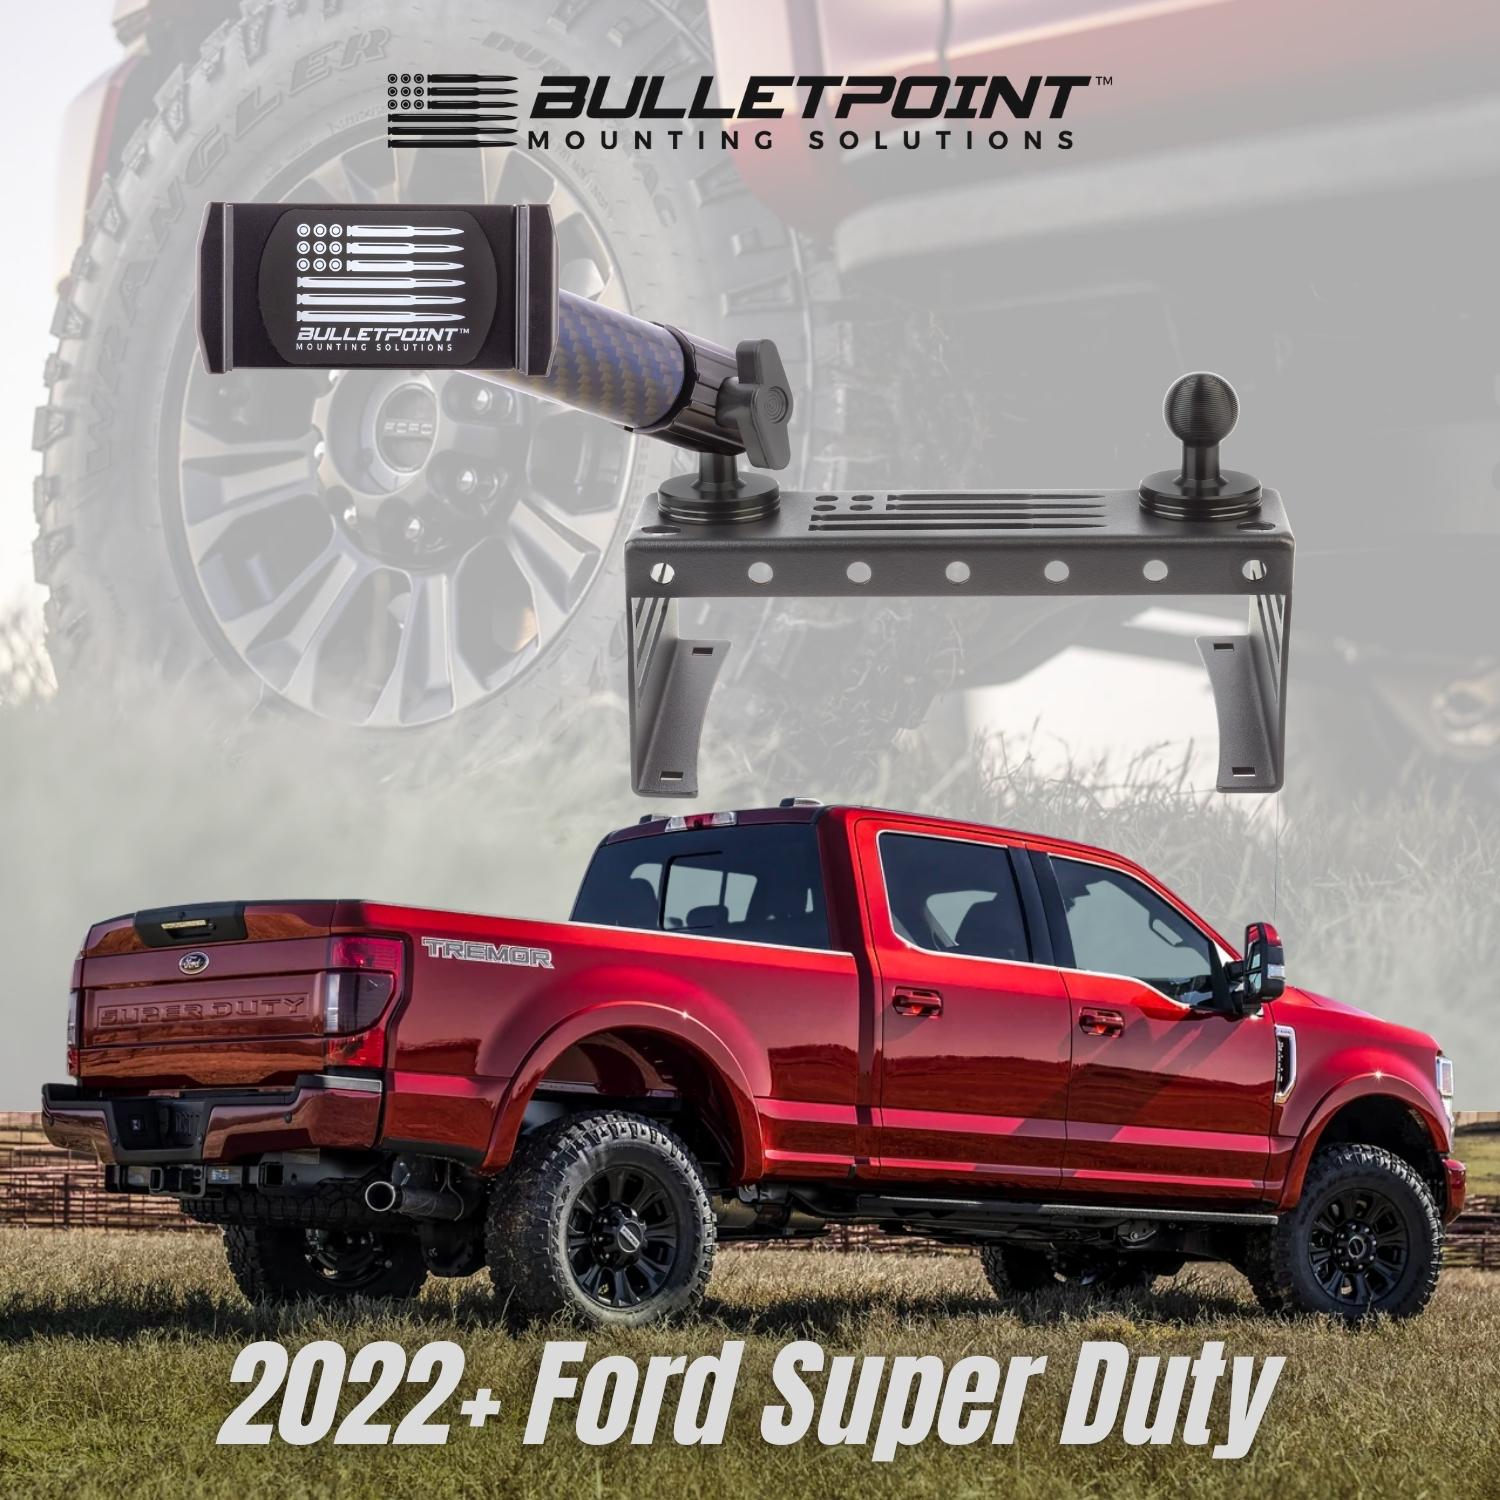 Bulletpoint Mounting Solutions 2022 Ford Super Duty Tremor Dash Mounted Phone Holder